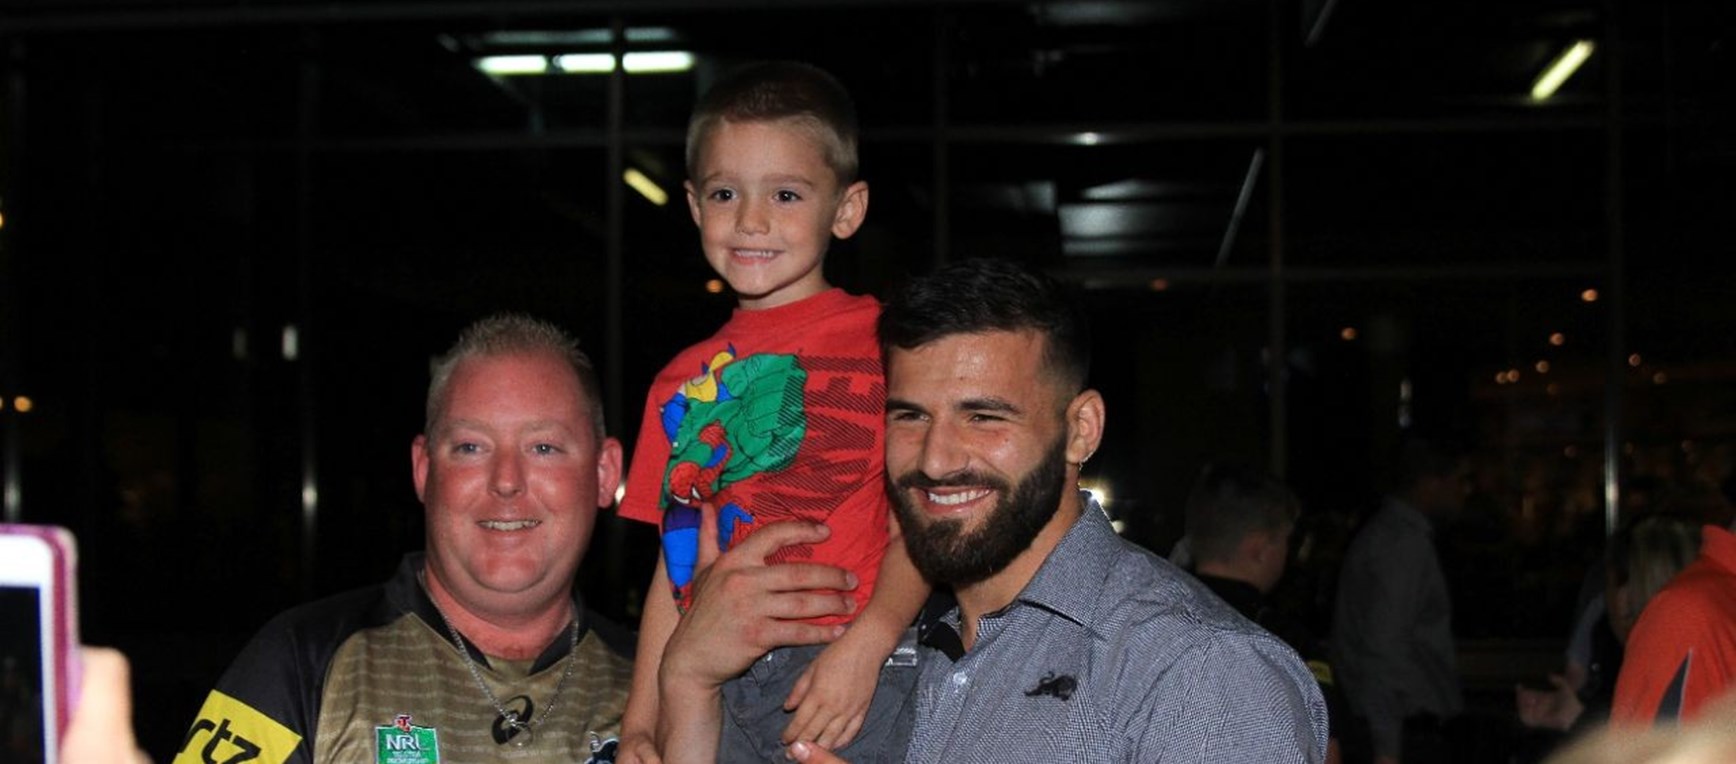 Gallery: Panthers post-game function